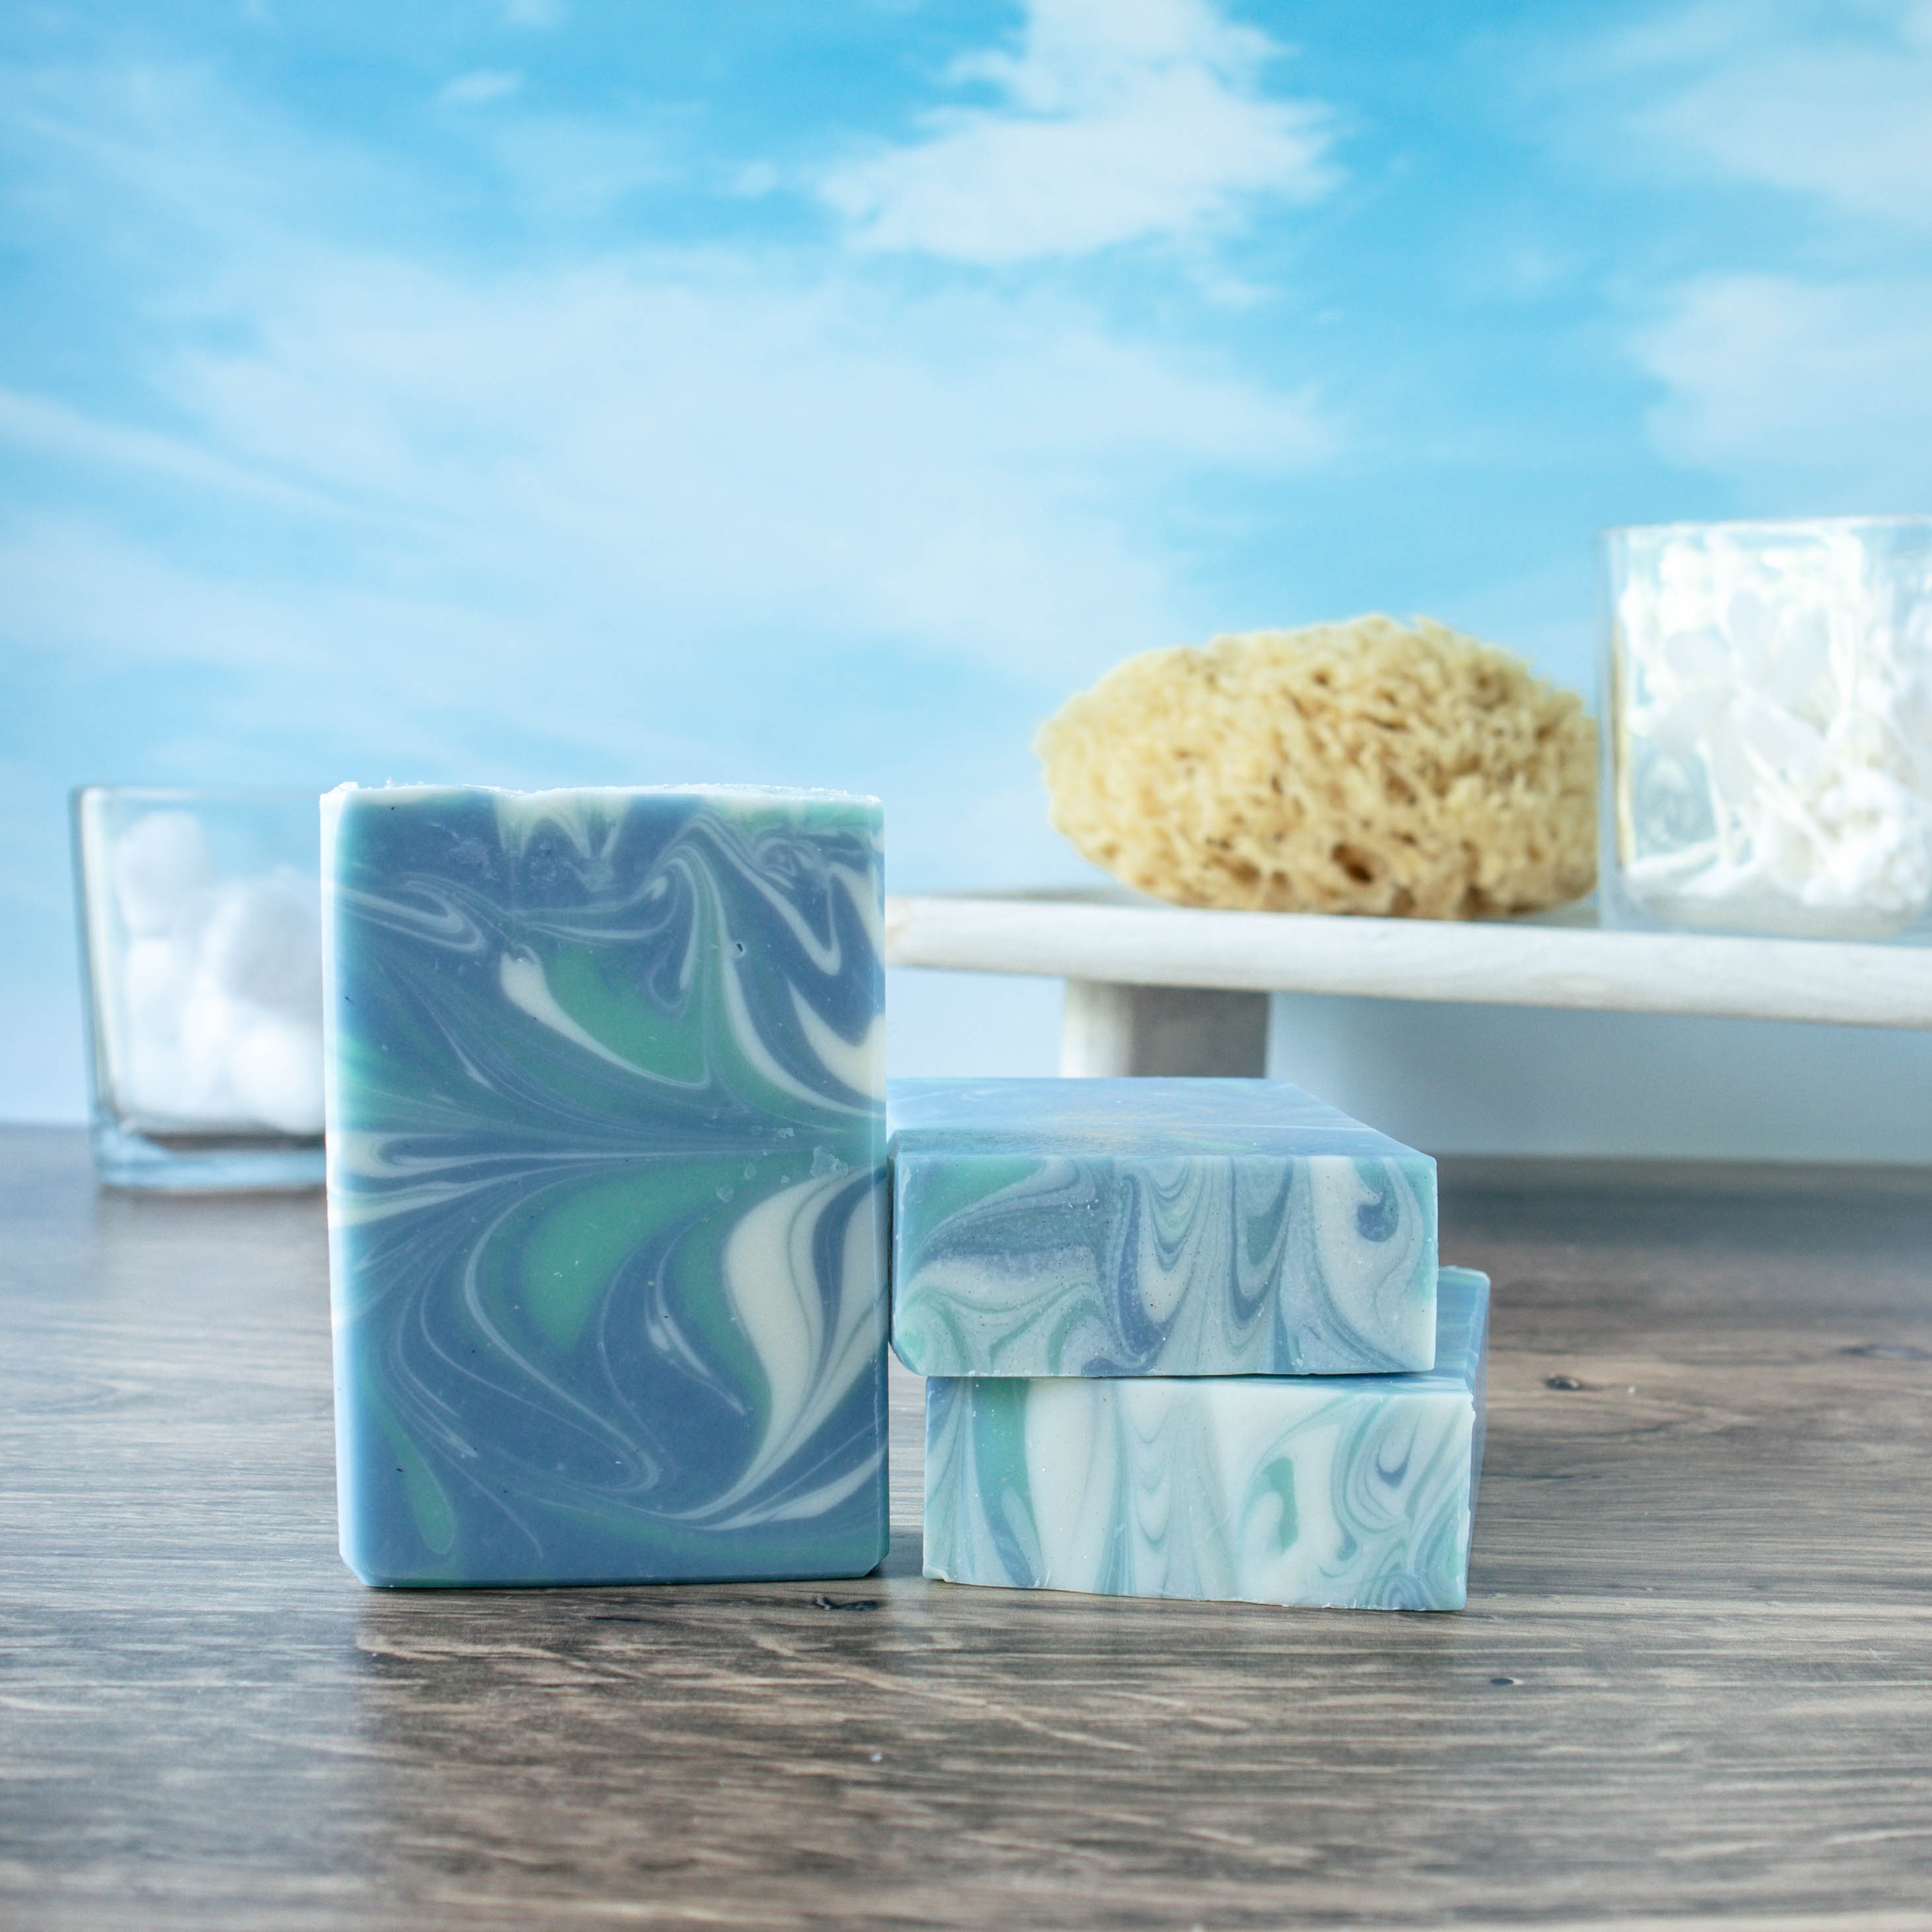 the face on view of tranquil waters, a mostly blue soap with whispy green and white swirls. There are 2 other bars showing a pretty swirl top. There is a sky background with a sea loofah and q-tips on a wooden tray.